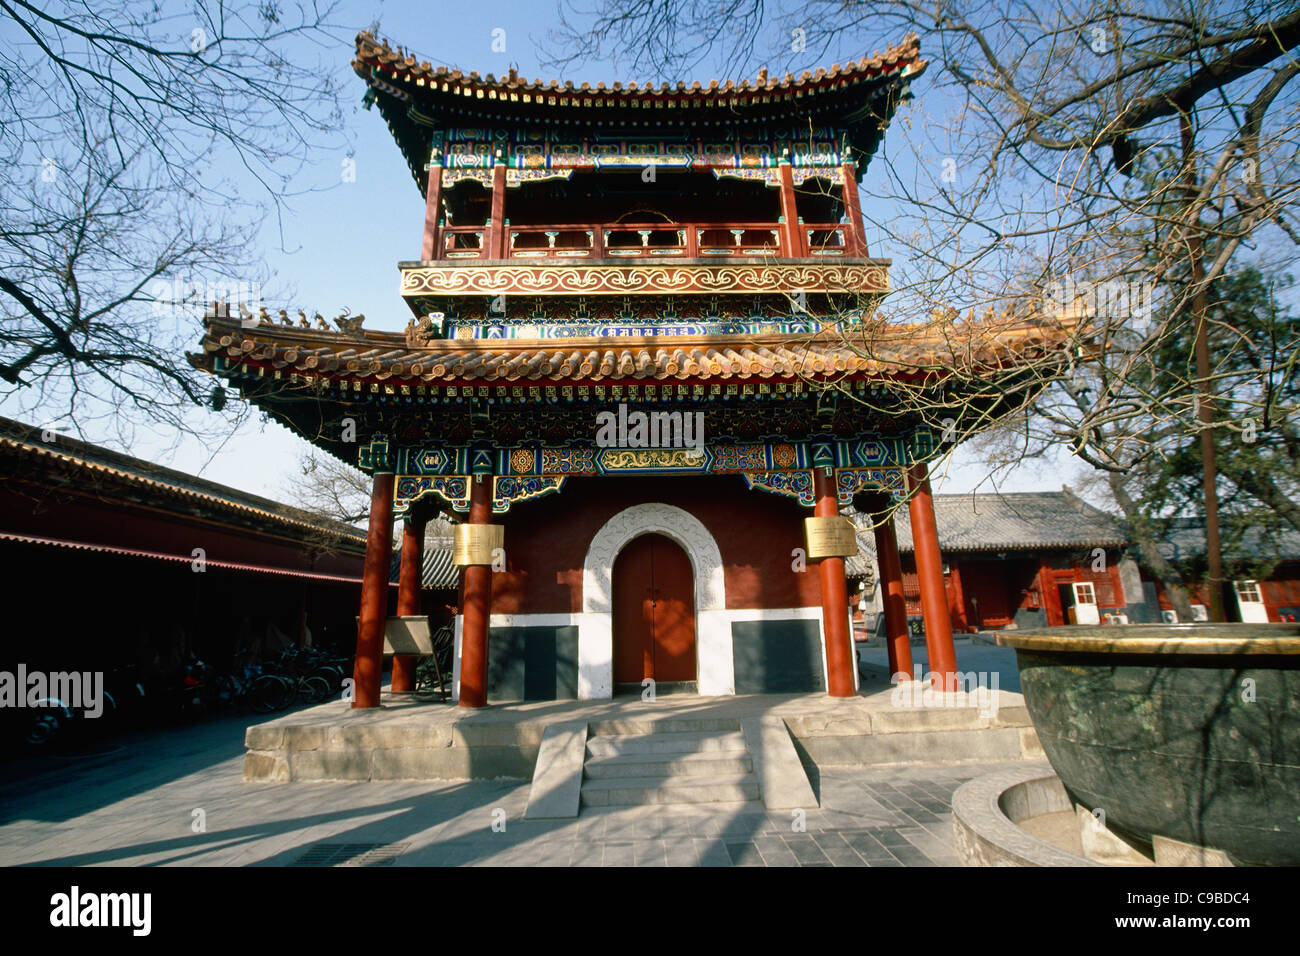 Low Angle View of a Drum Tower, Lama Temple Yonghe Lamaserie), Beijing Chine Banque D'Images